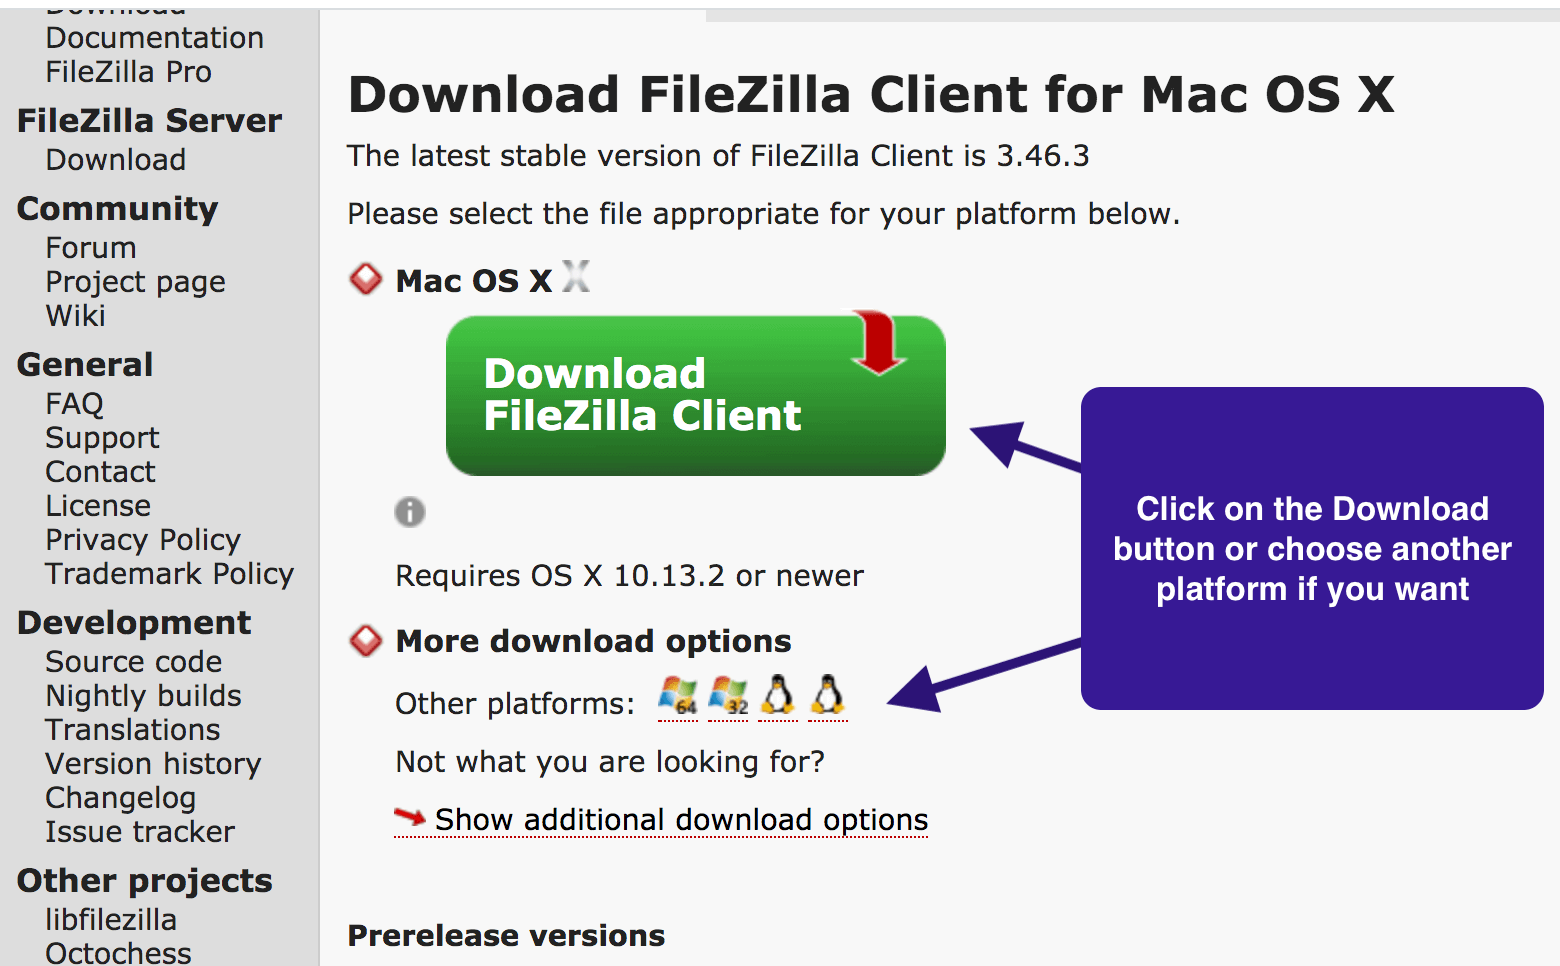 How to Download FileZilla